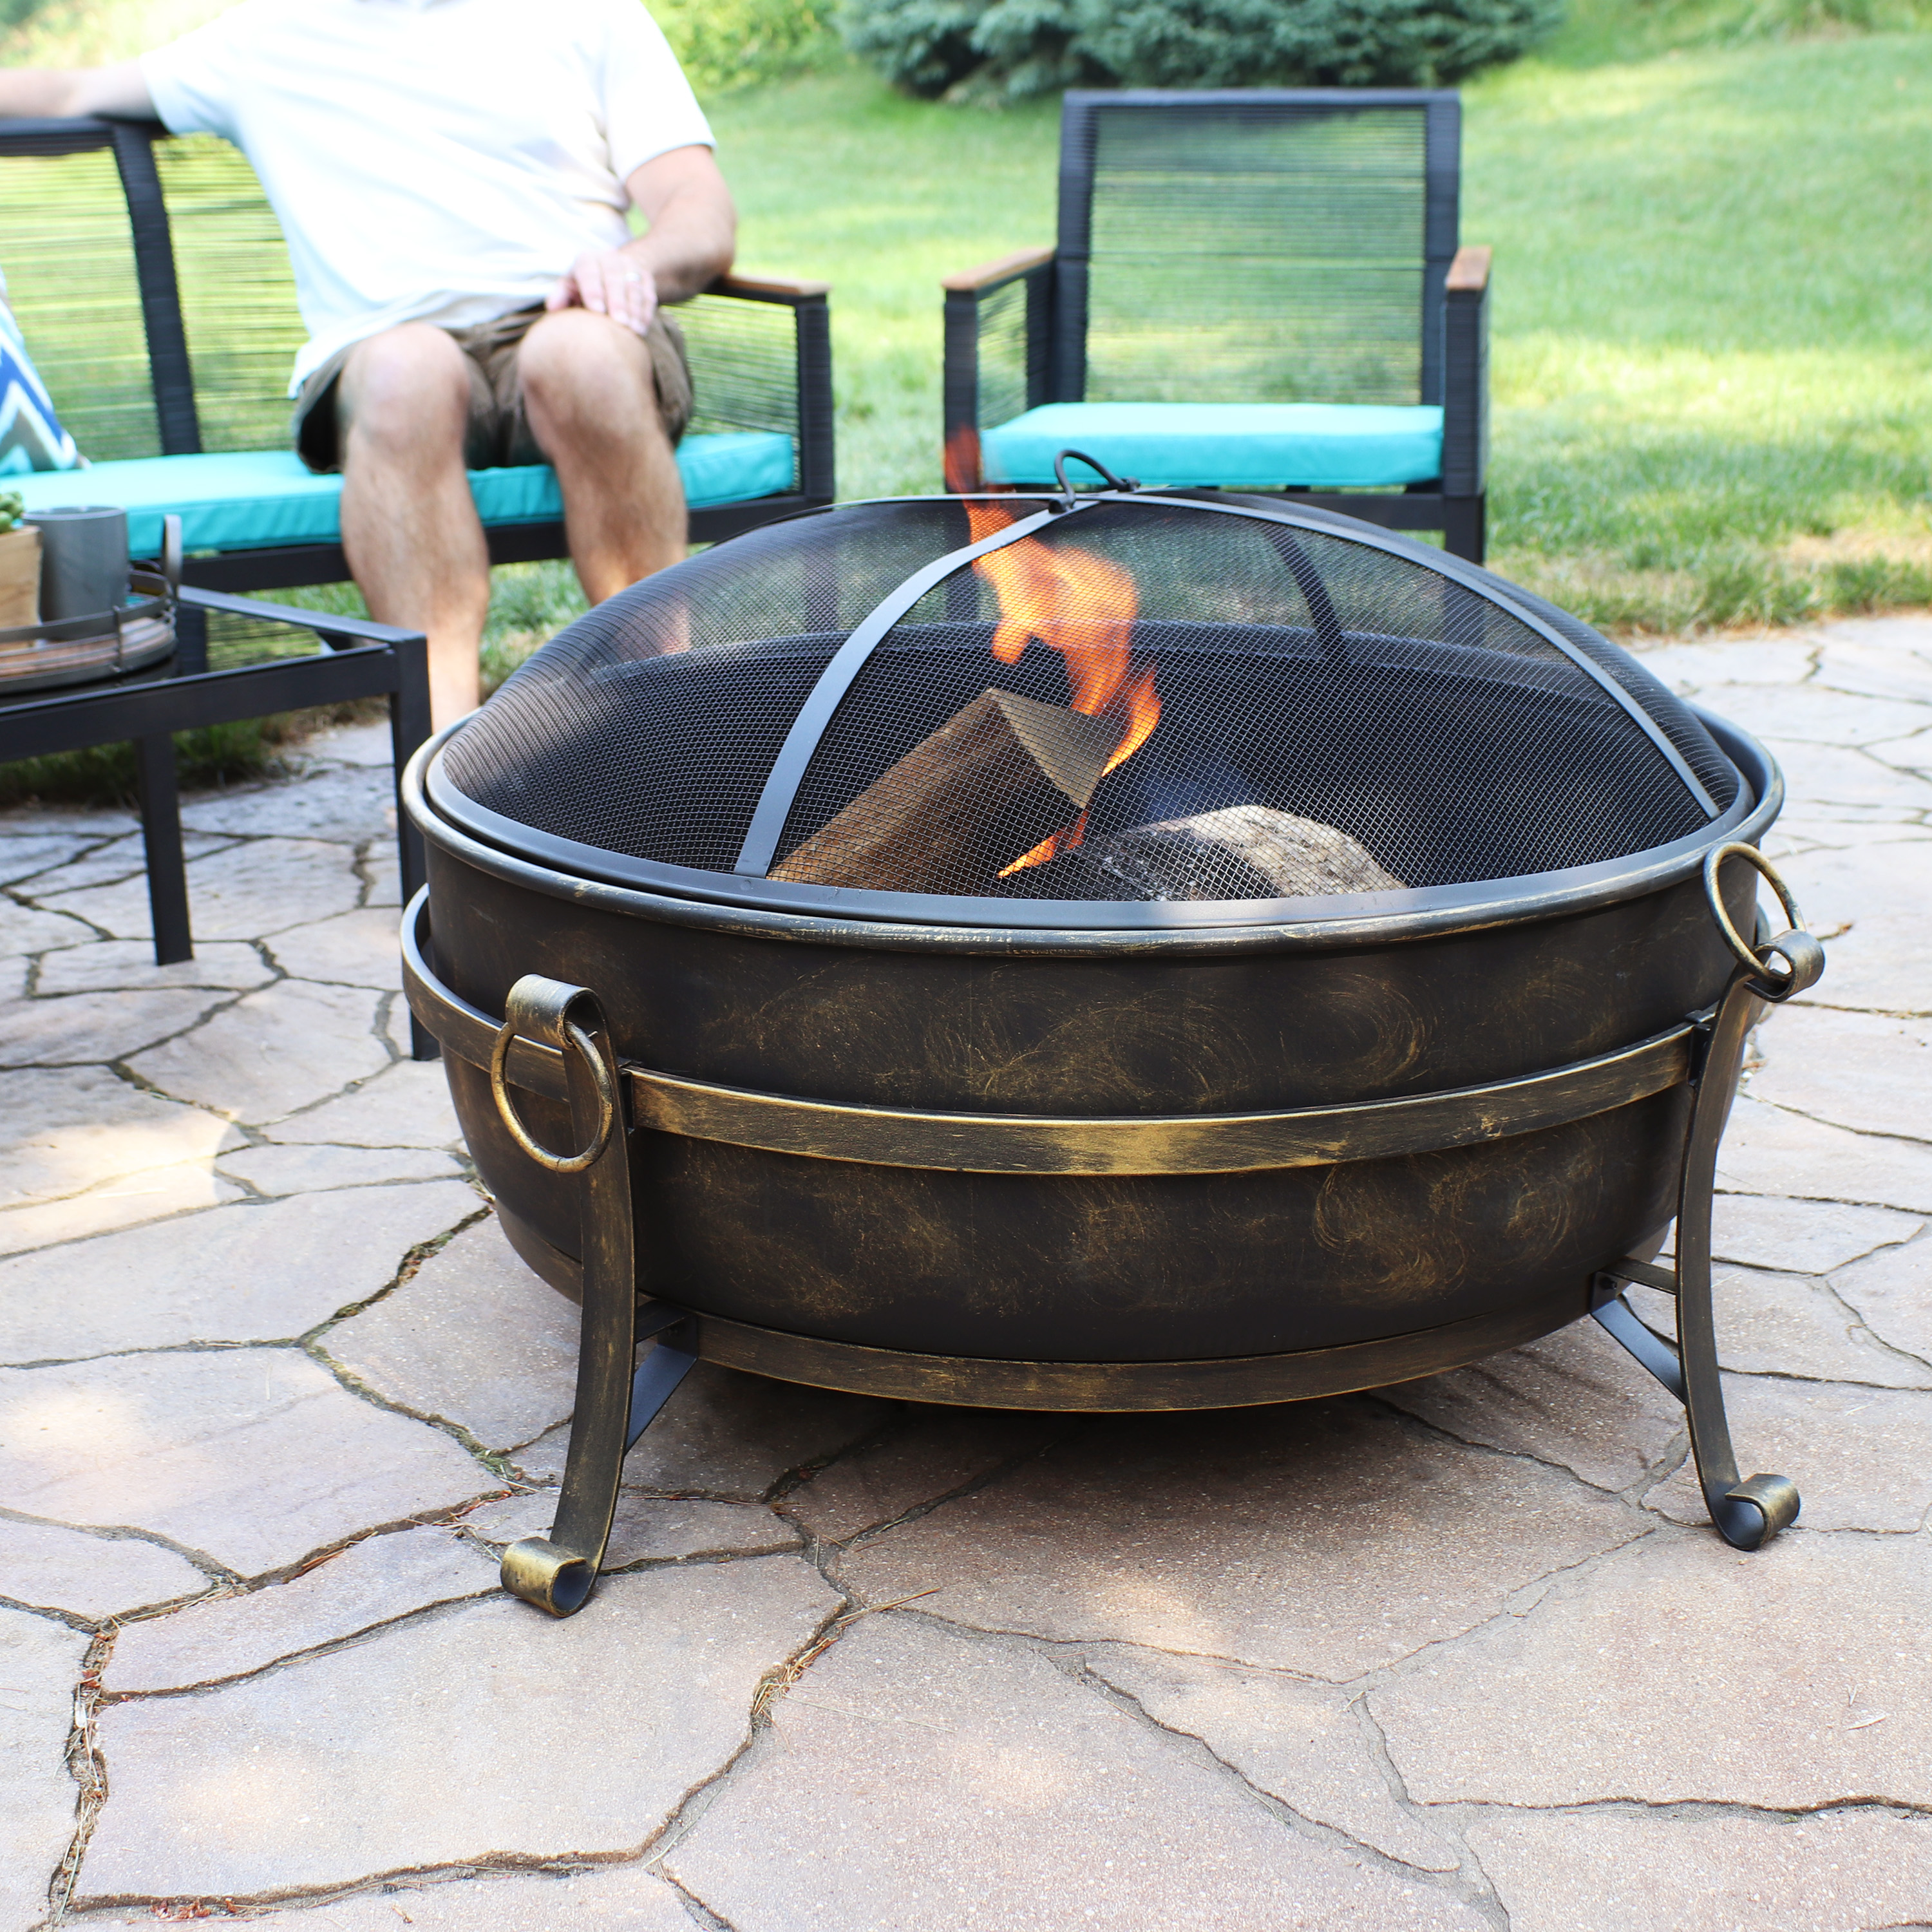 Sunnydaze Large Outdoor Cauldron Fire Pit with Spark Screen - 34" - image 2 of 9